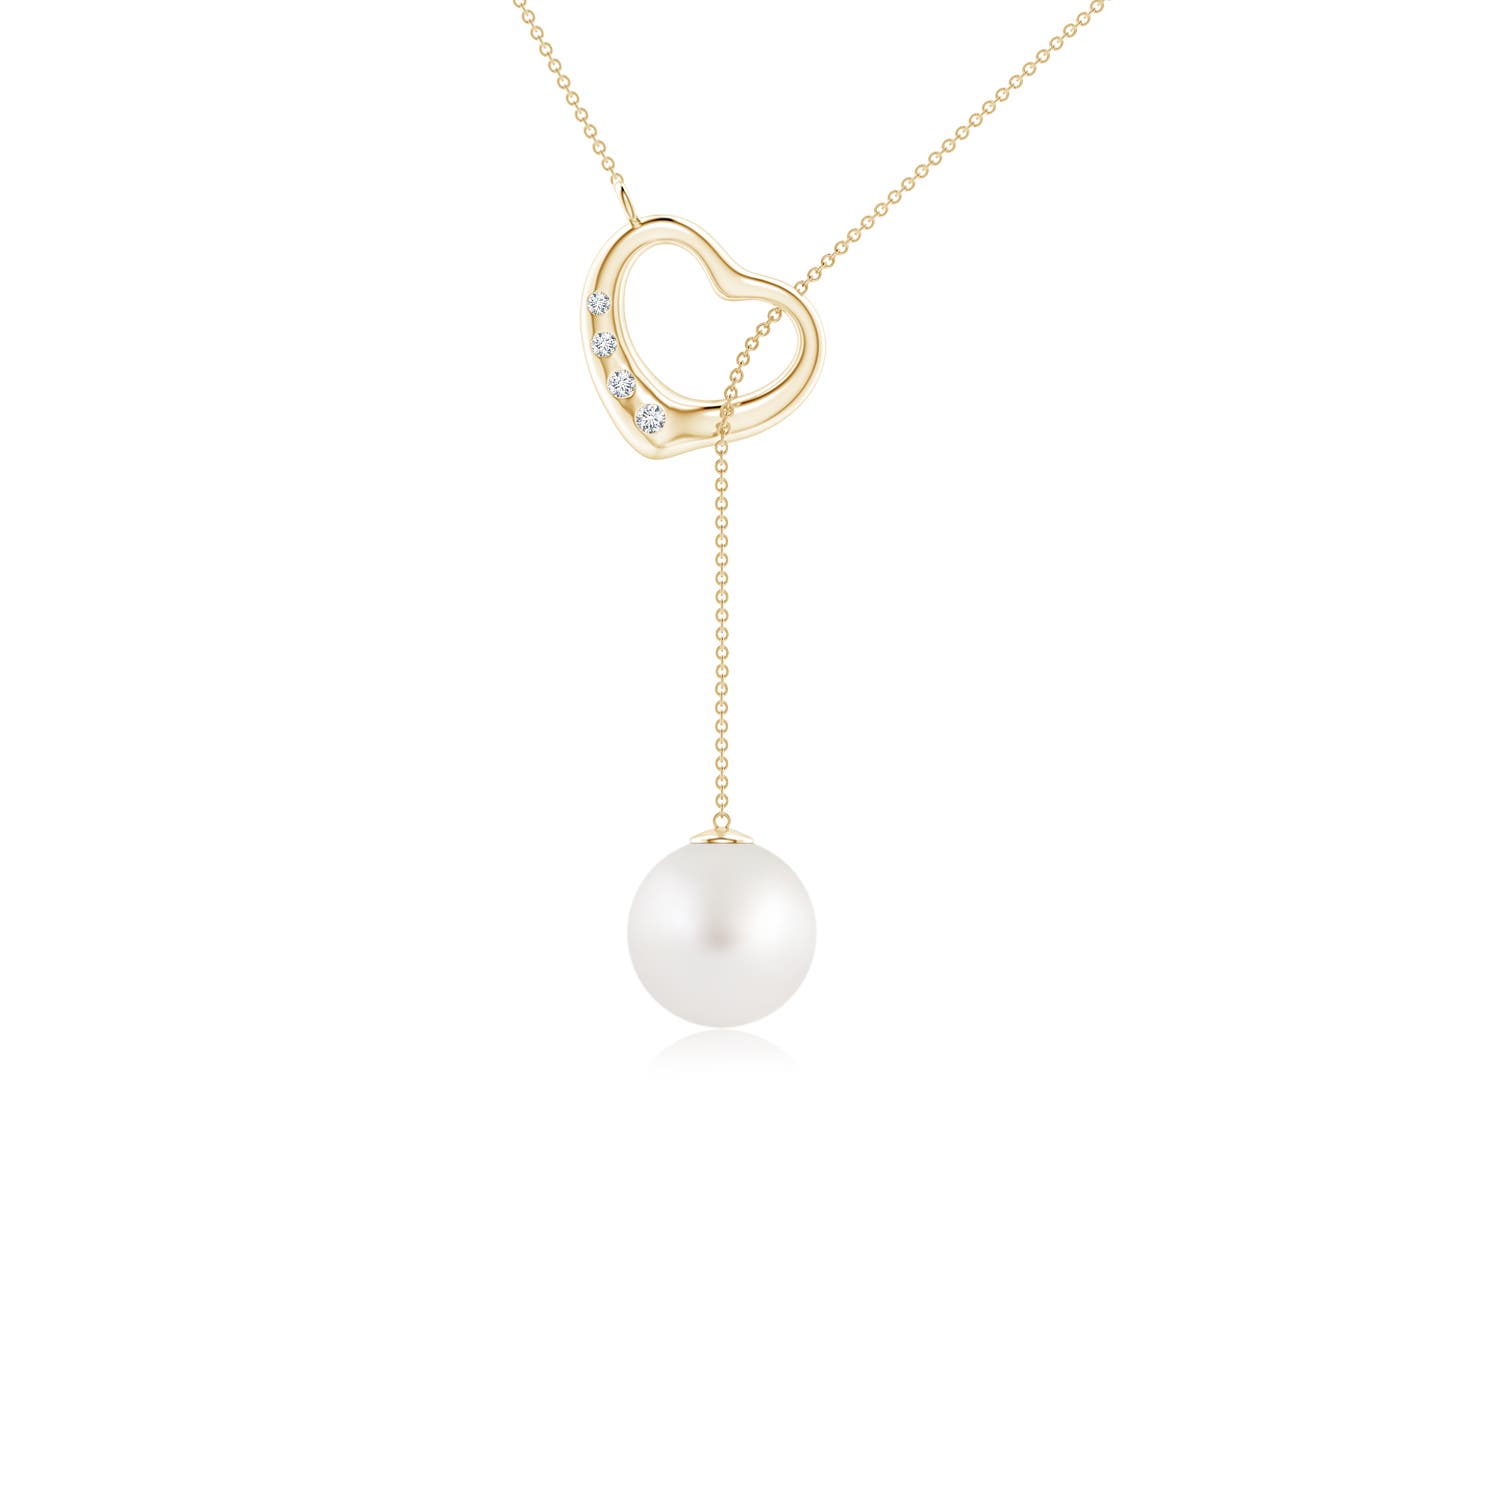 AA - South Sea Cultured Pearl / 3.73 CT / 14 KT Yellow Gold